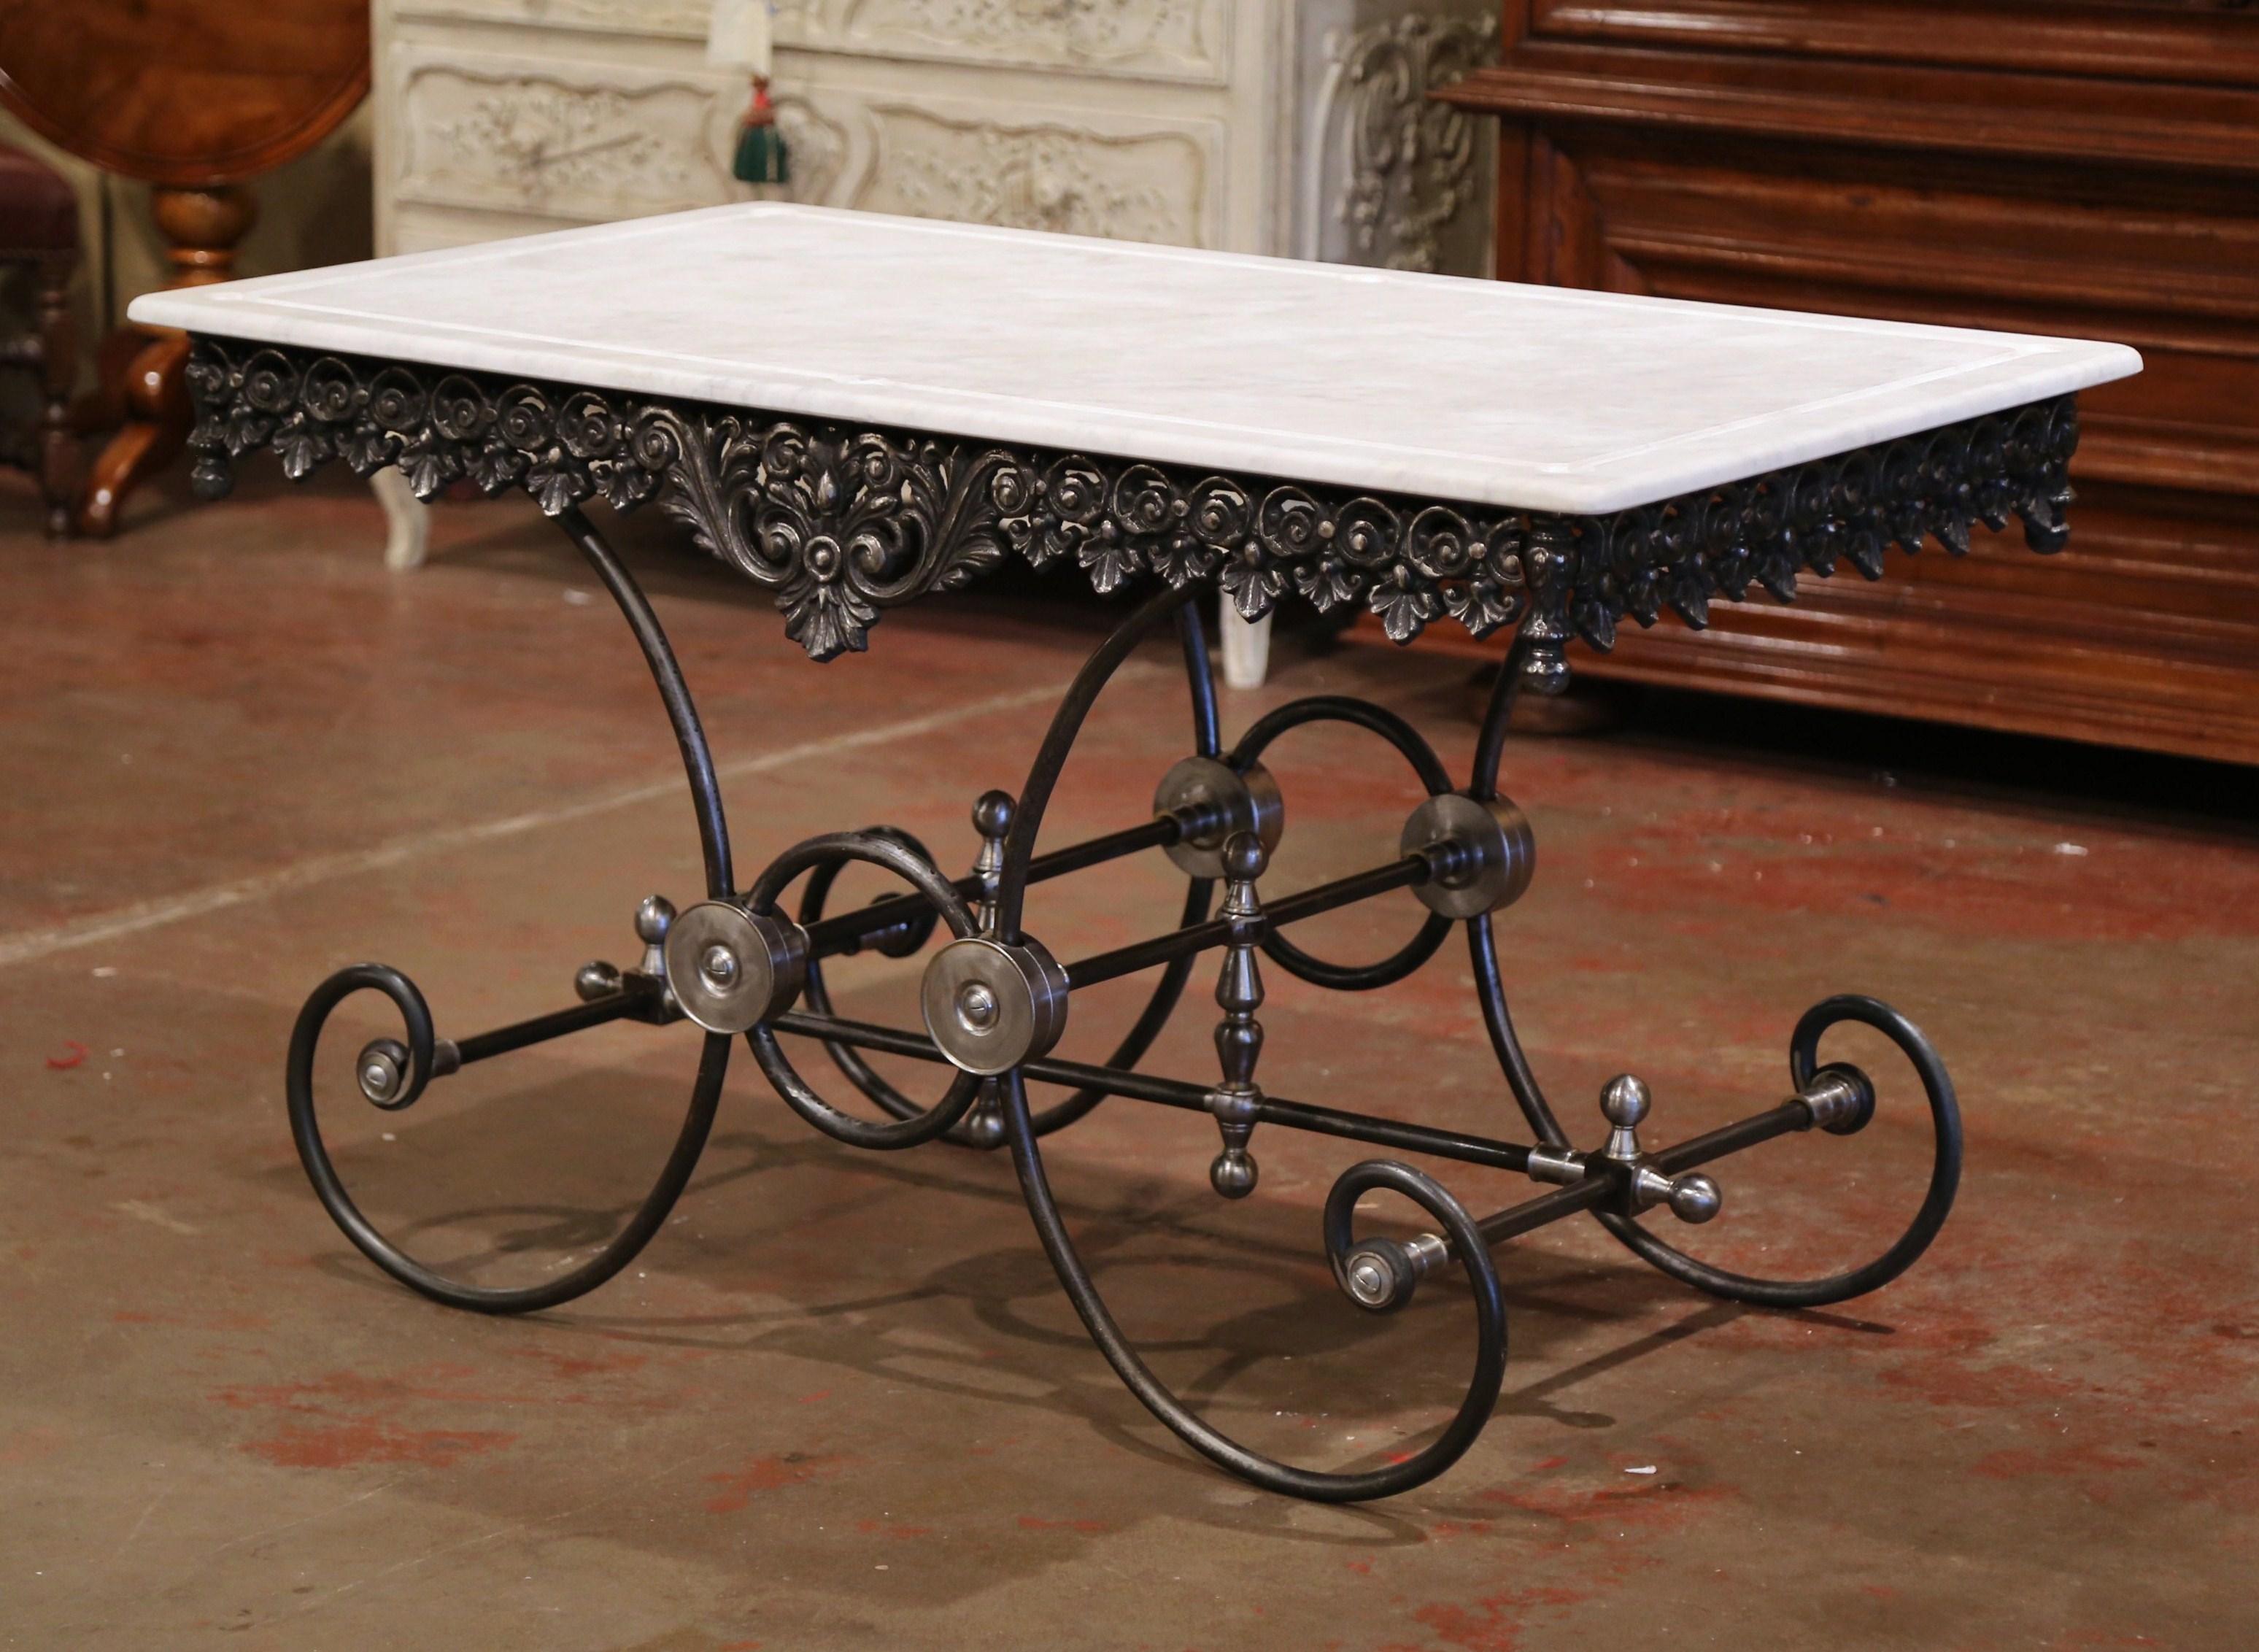 Hand-Crafted French Polished Iron Butcher or Pastry Table with White Marble Top